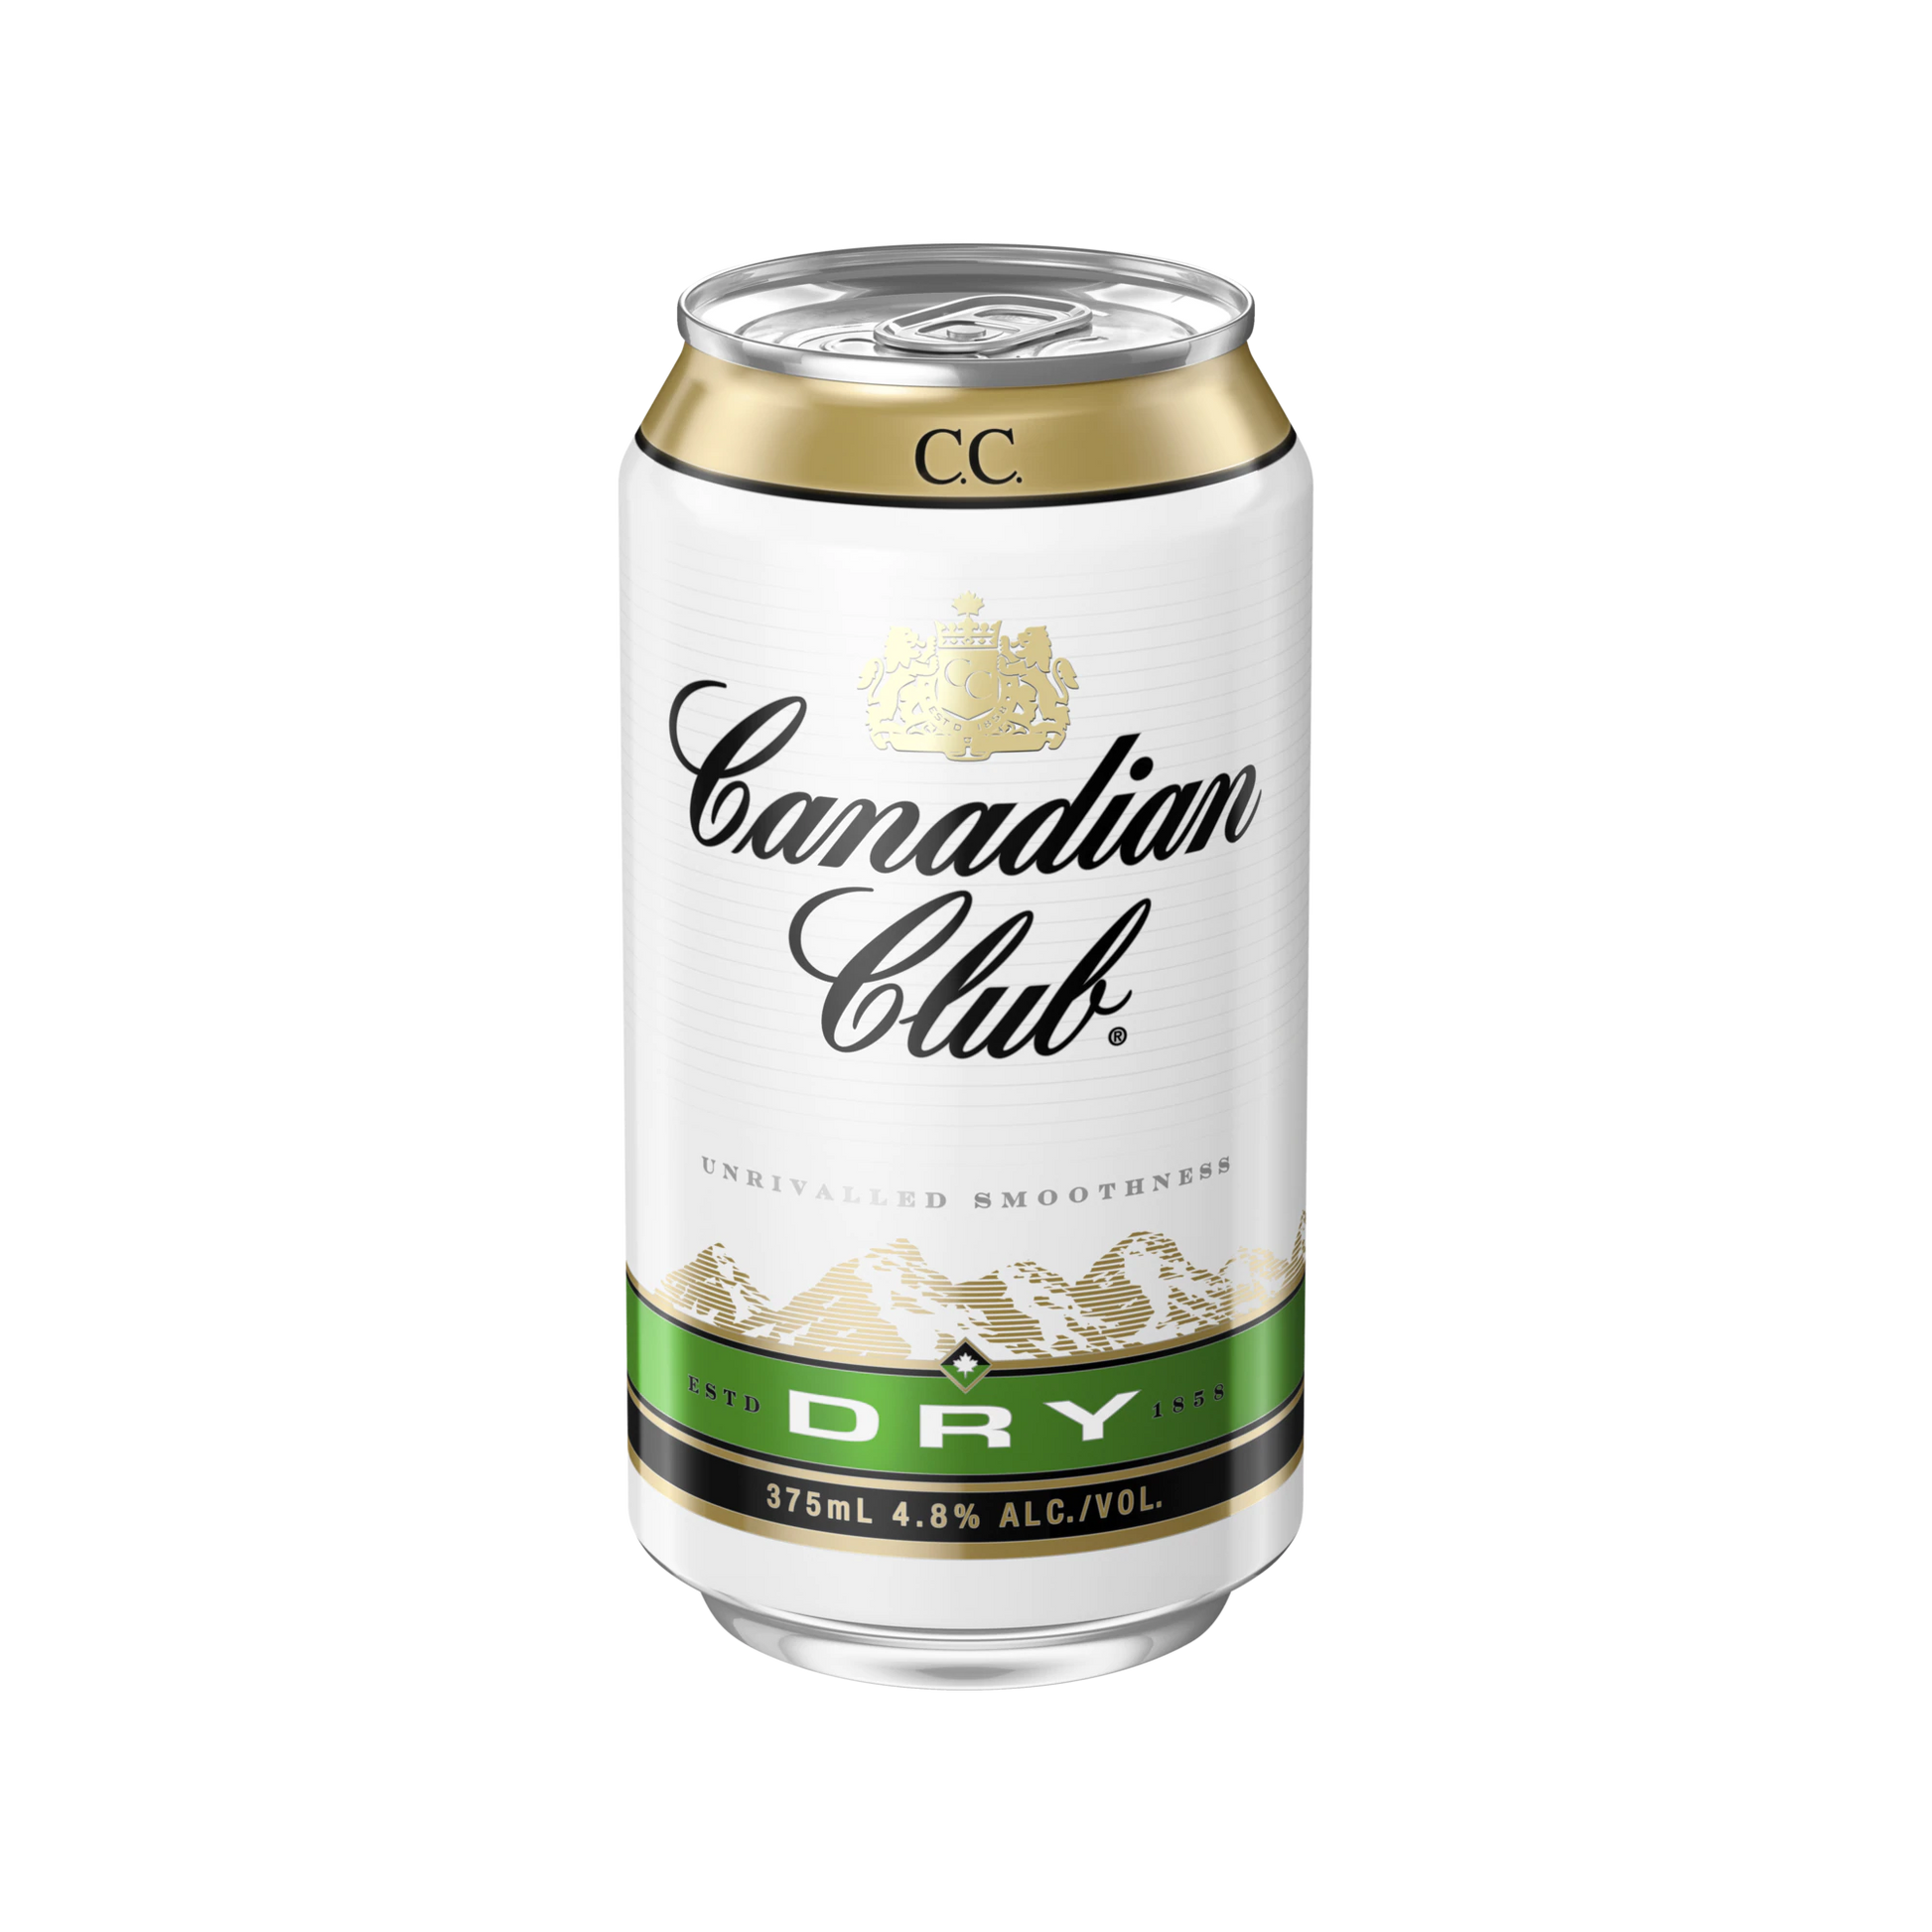 Canadian Club & Dry Cans 375ml – 